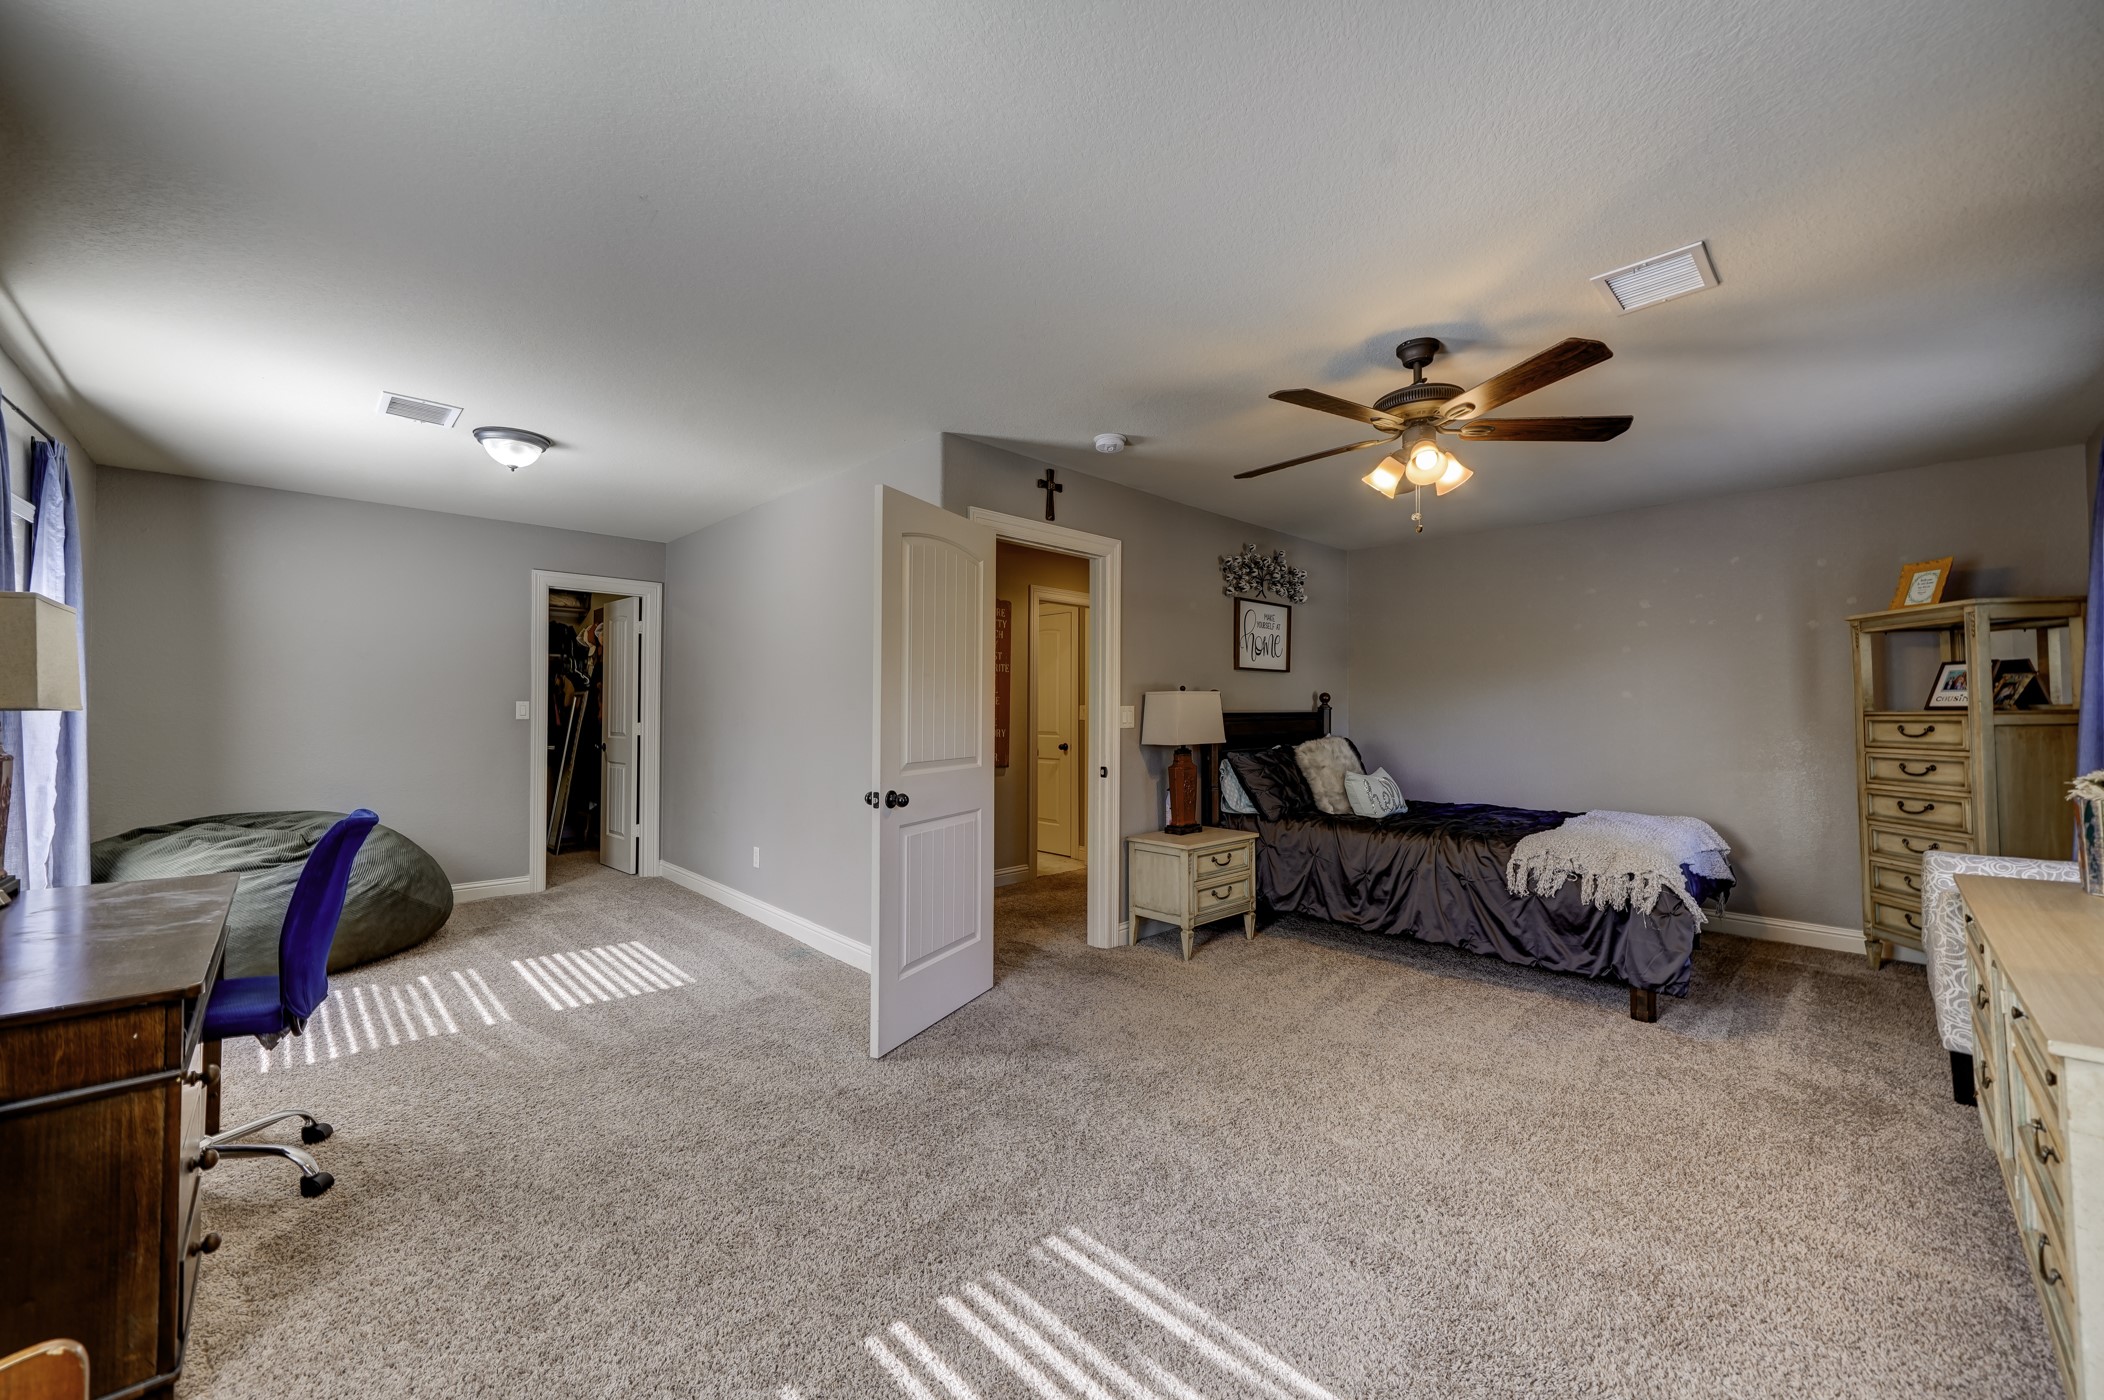 The second floor reveals this tremendous game room or sizable 4th bedroom!